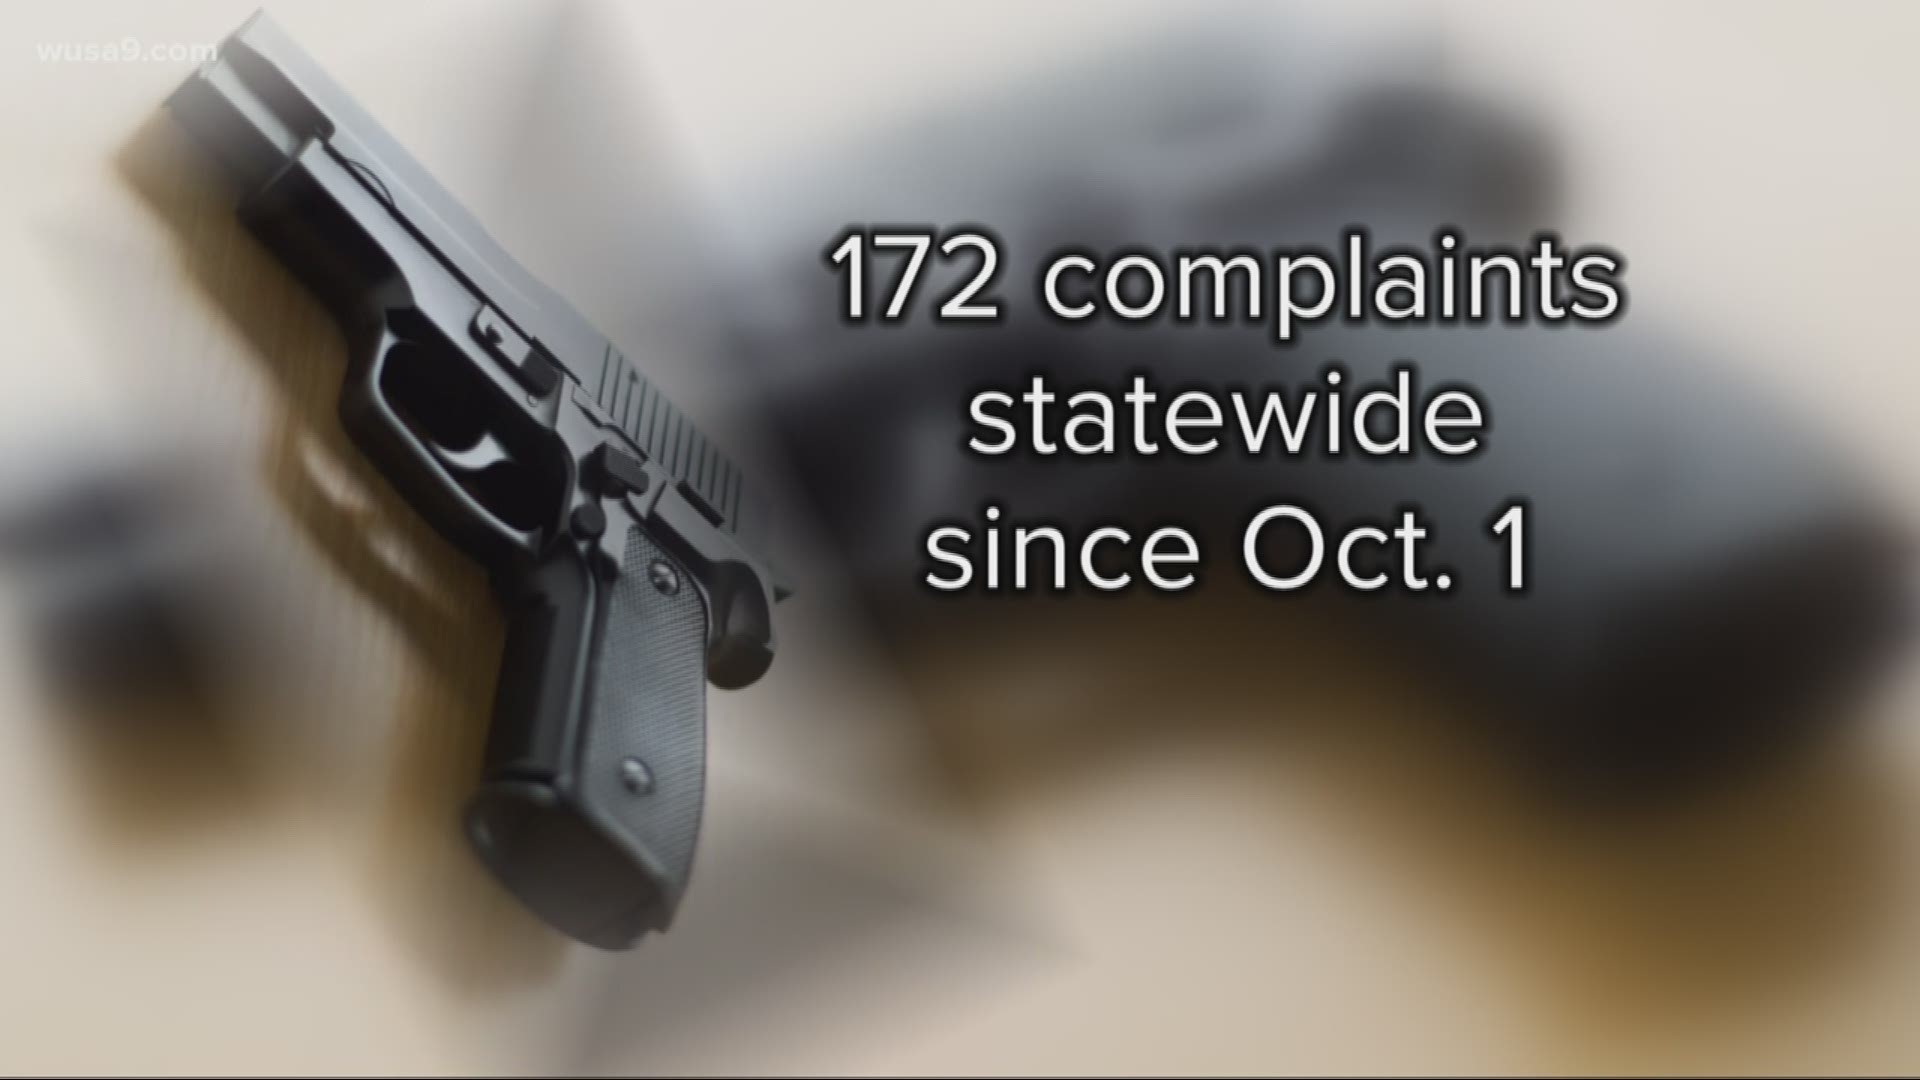 There have been at least 172 "extreme risk" complaints in Maryland allowing the seizure of guns filed in the seven weeks since the state's controversial "Red Flag" law went into effect October 1st - a number that has exceeded expectations, according to Mo